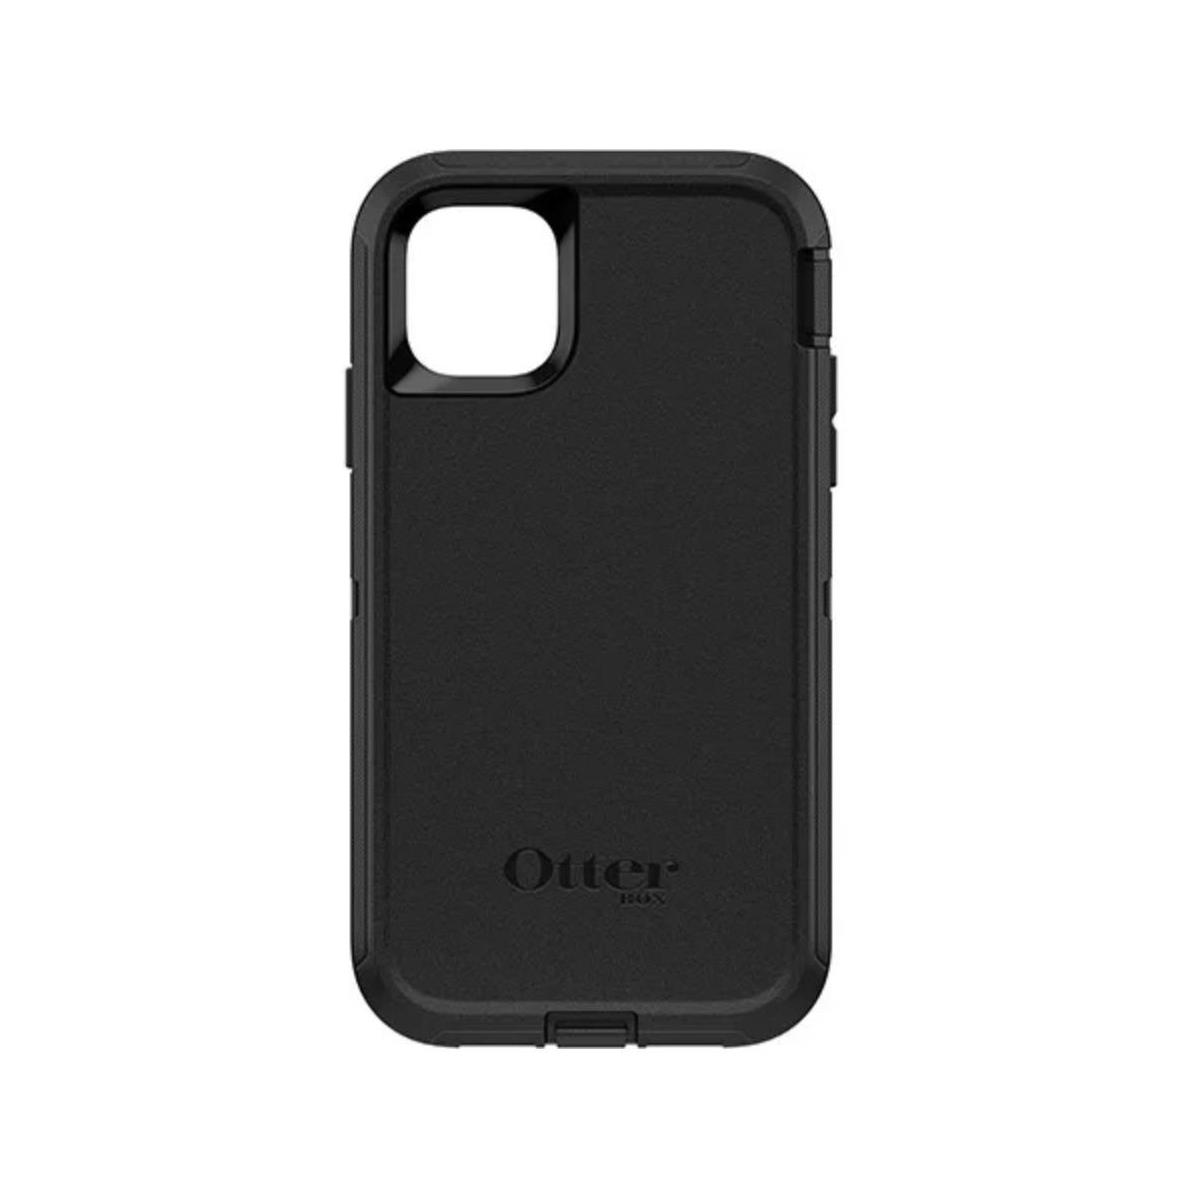 Photos - Case OtterBox Defender Screenless Edition  for iPhone 11, Black 77-62457 